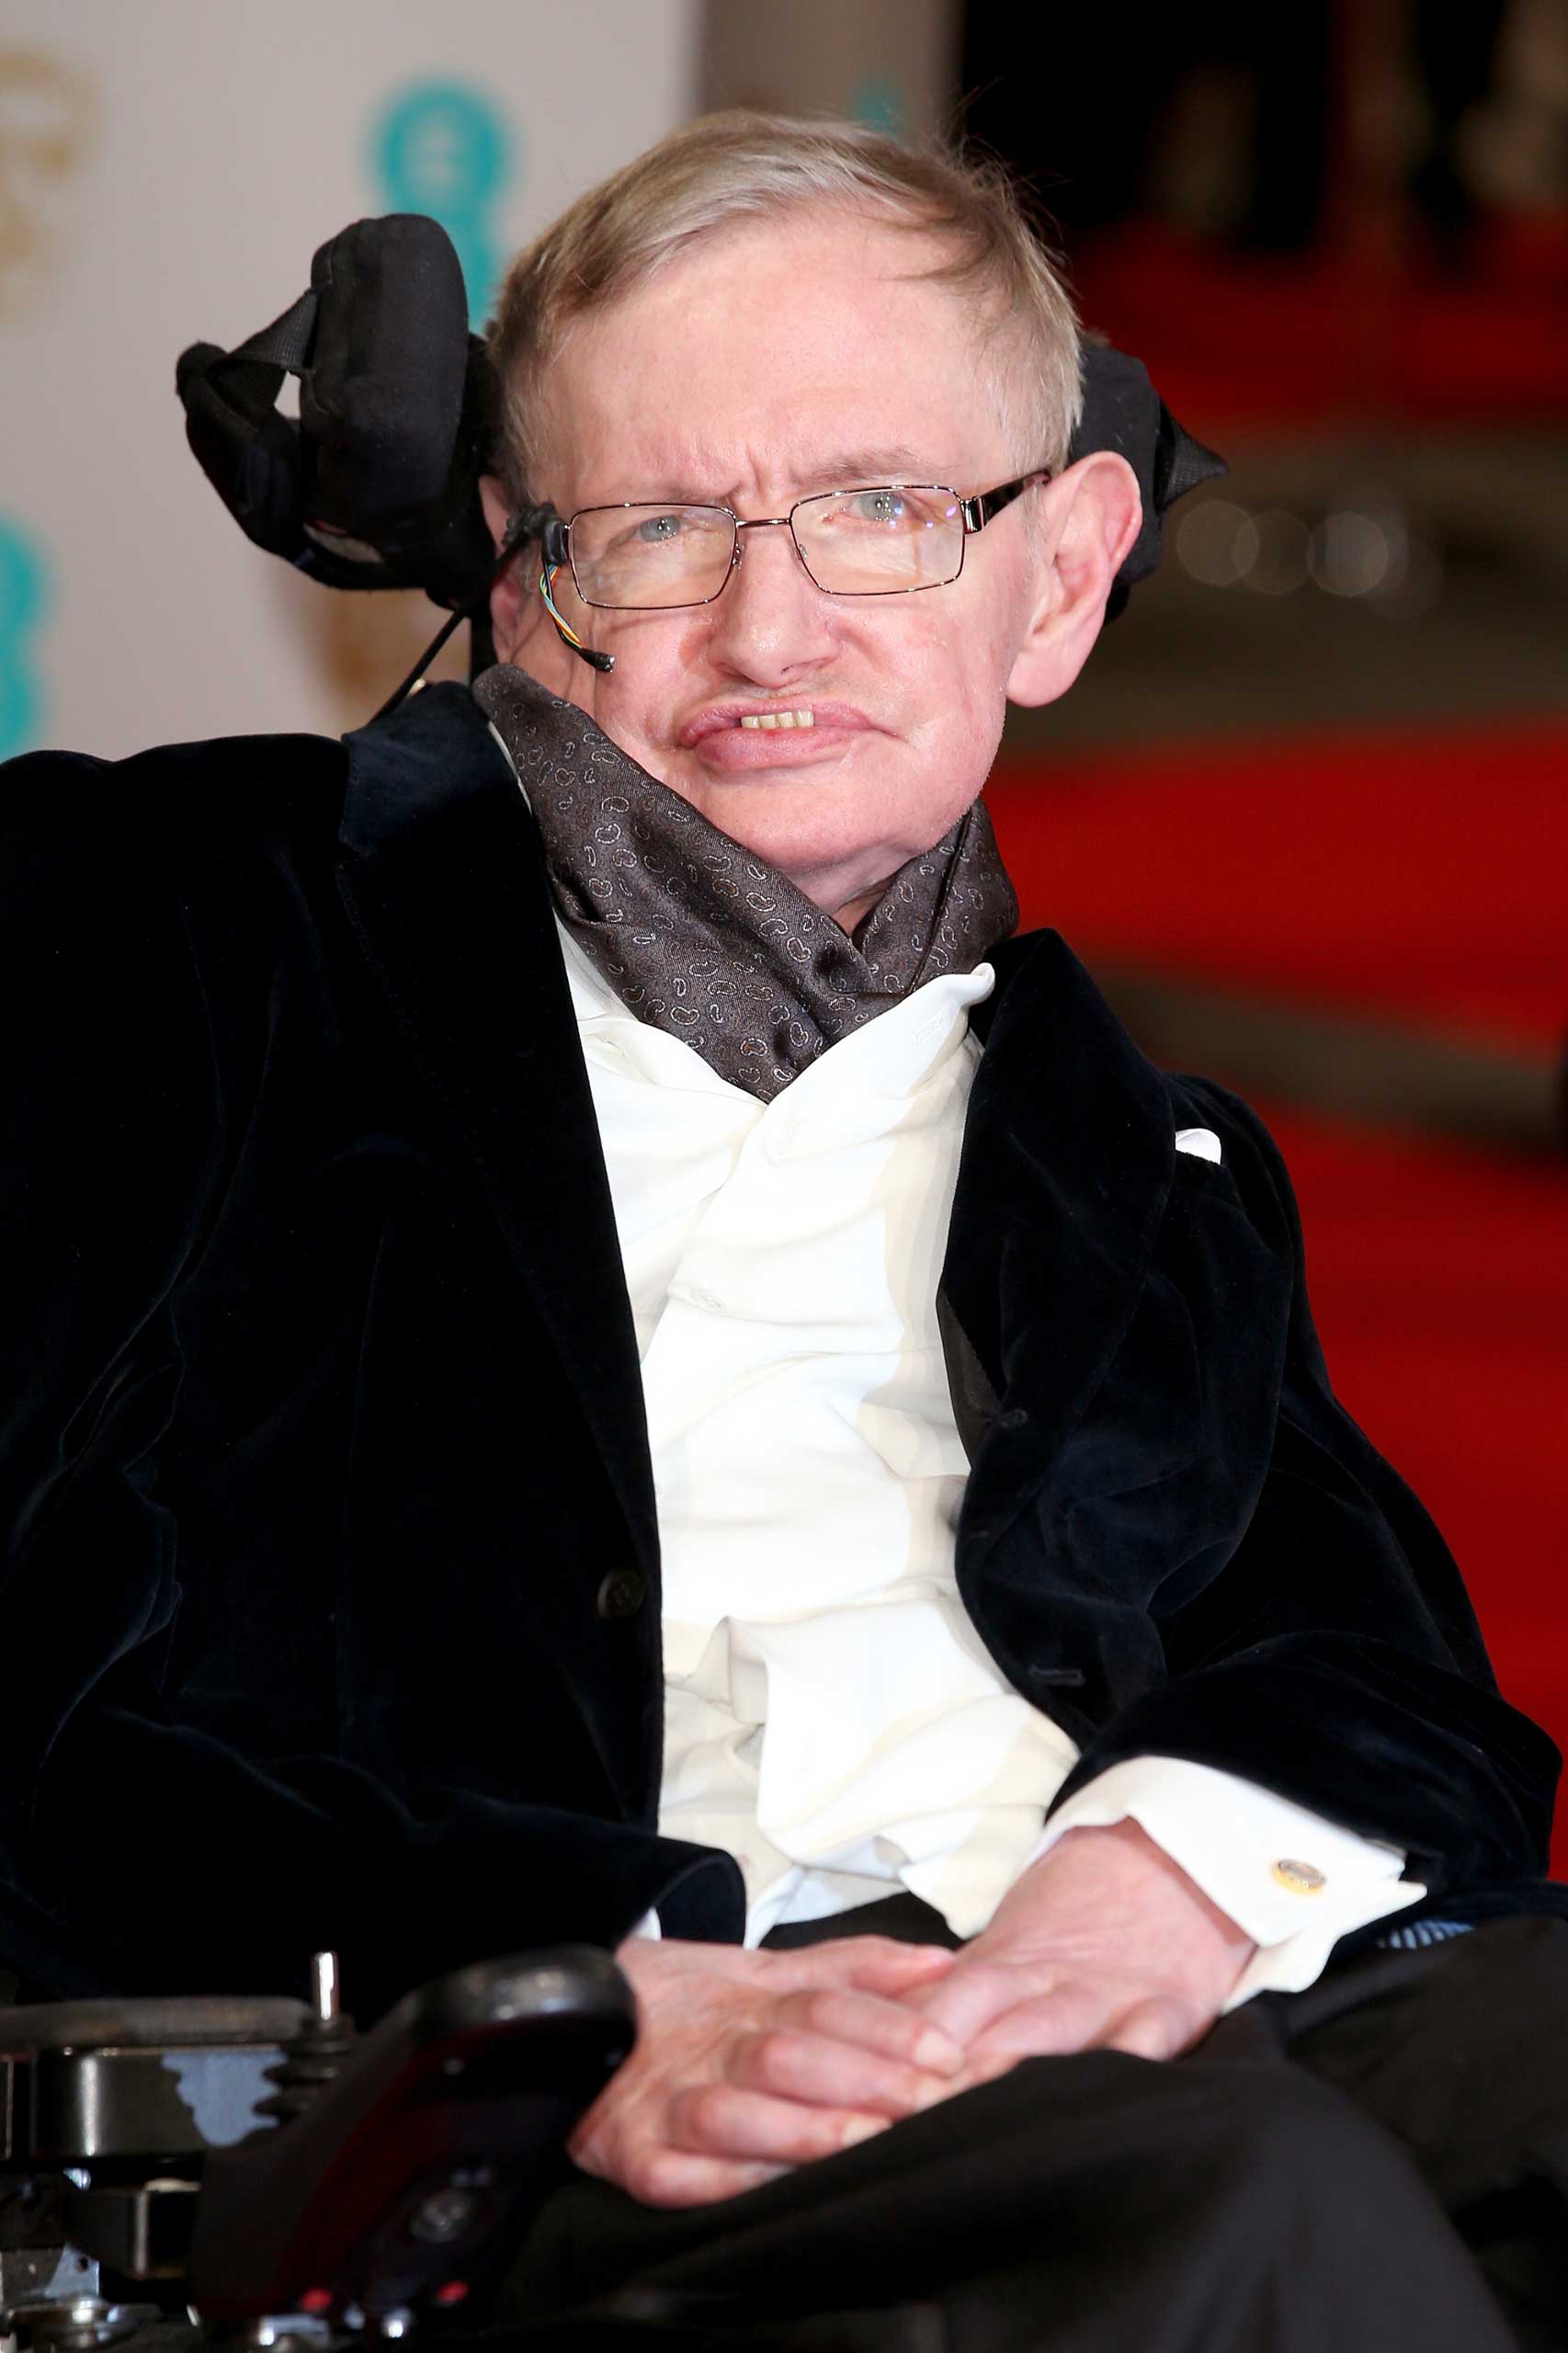 Stephen Hawking attends the EE British Academy Film Awards at The Royal Opera House in London on Feb. 8, 2015. (Mike Marsland&mdash;WireImage)